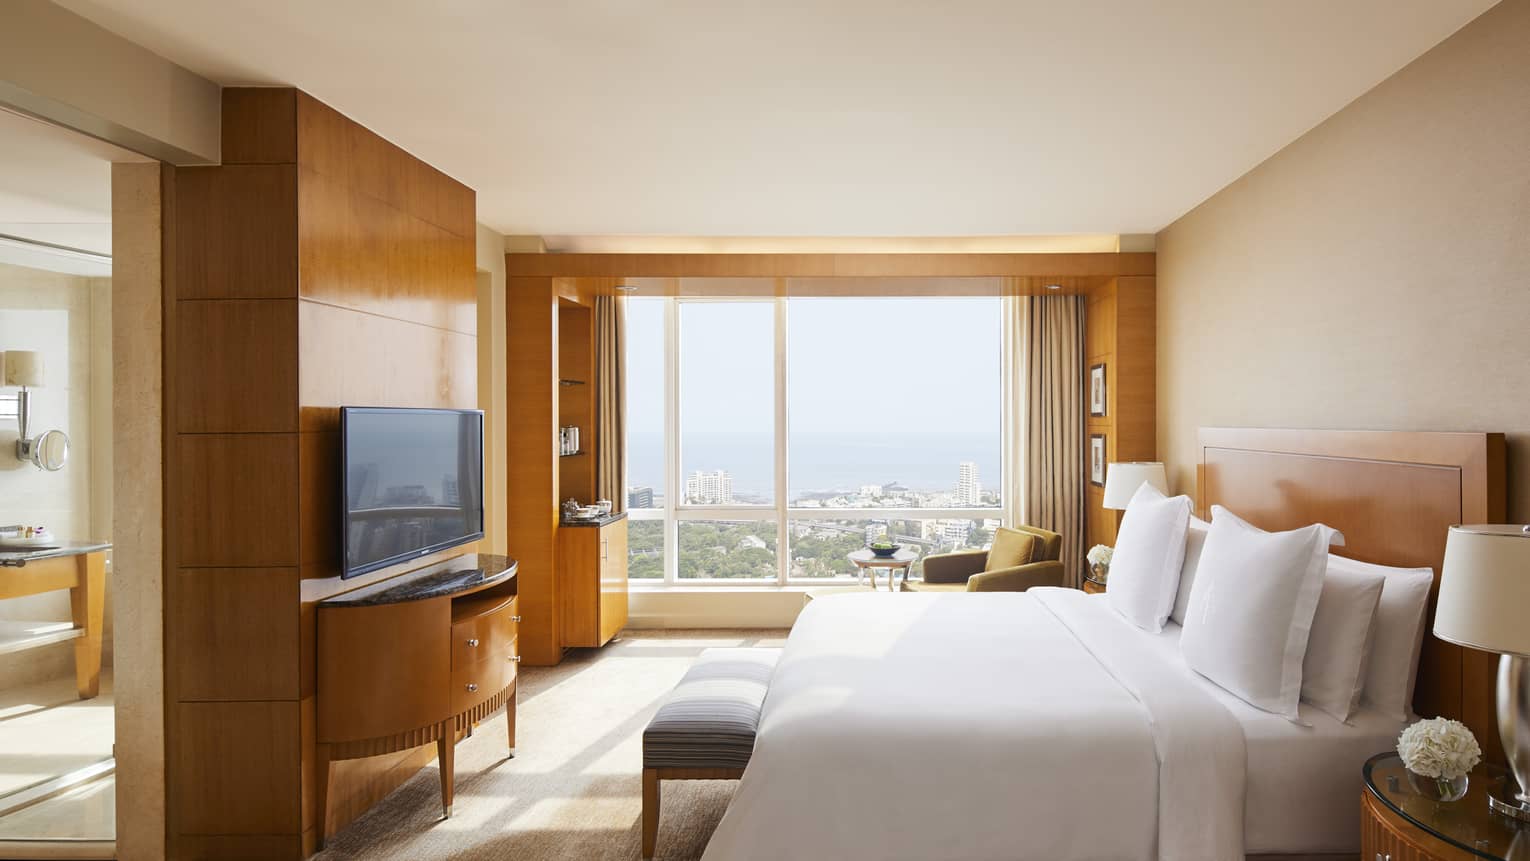 Deluxe room with natural light coming in and a view of the Mumbai skyline